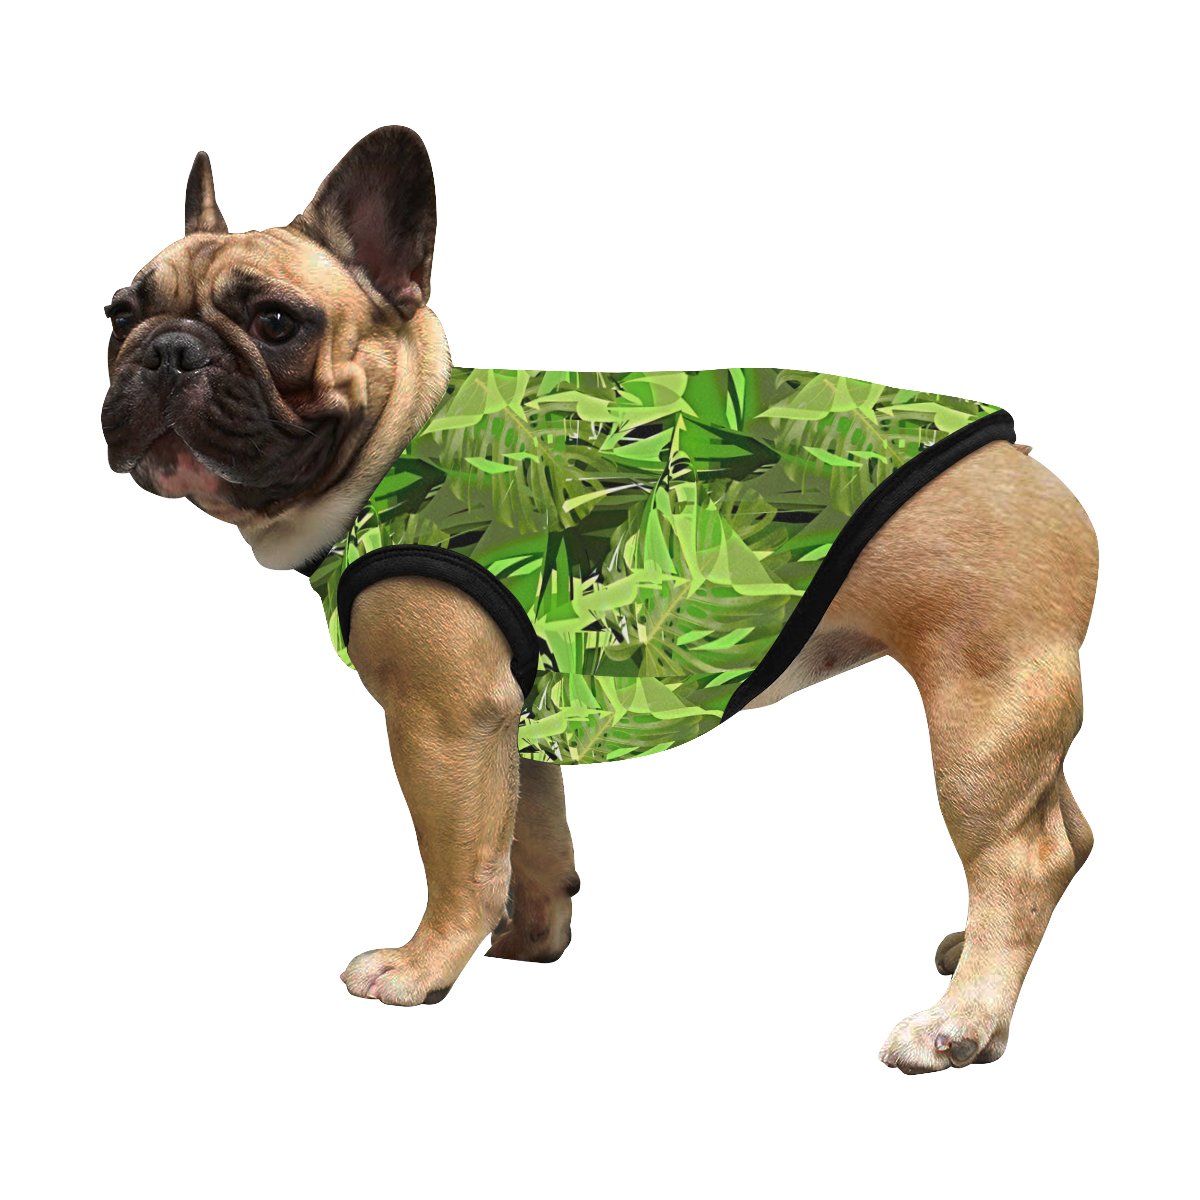 Tropical Jungle Leaves Camouflage All Over Print Pet Tank Top